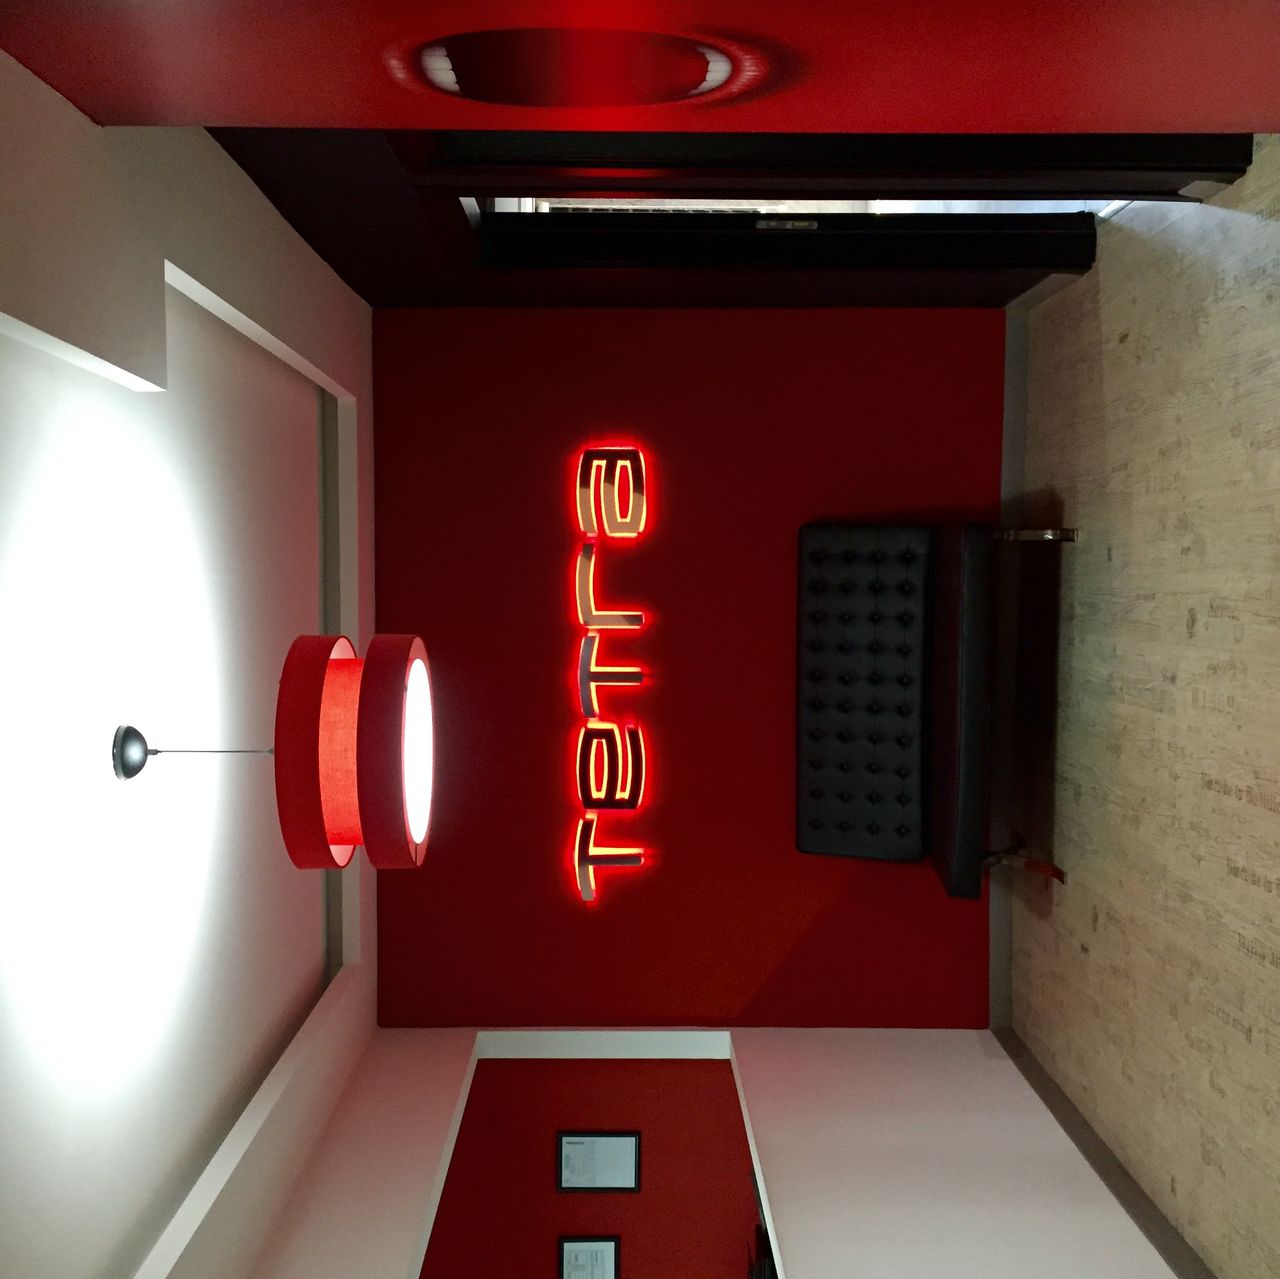 red, illuminated, indoors, architecture, built structure, lighting equipment, hanging, communication, text, no people, building exterior, low angle view, decoration, wall - building feature, in a row, western script, door, lantern, technology, electric light